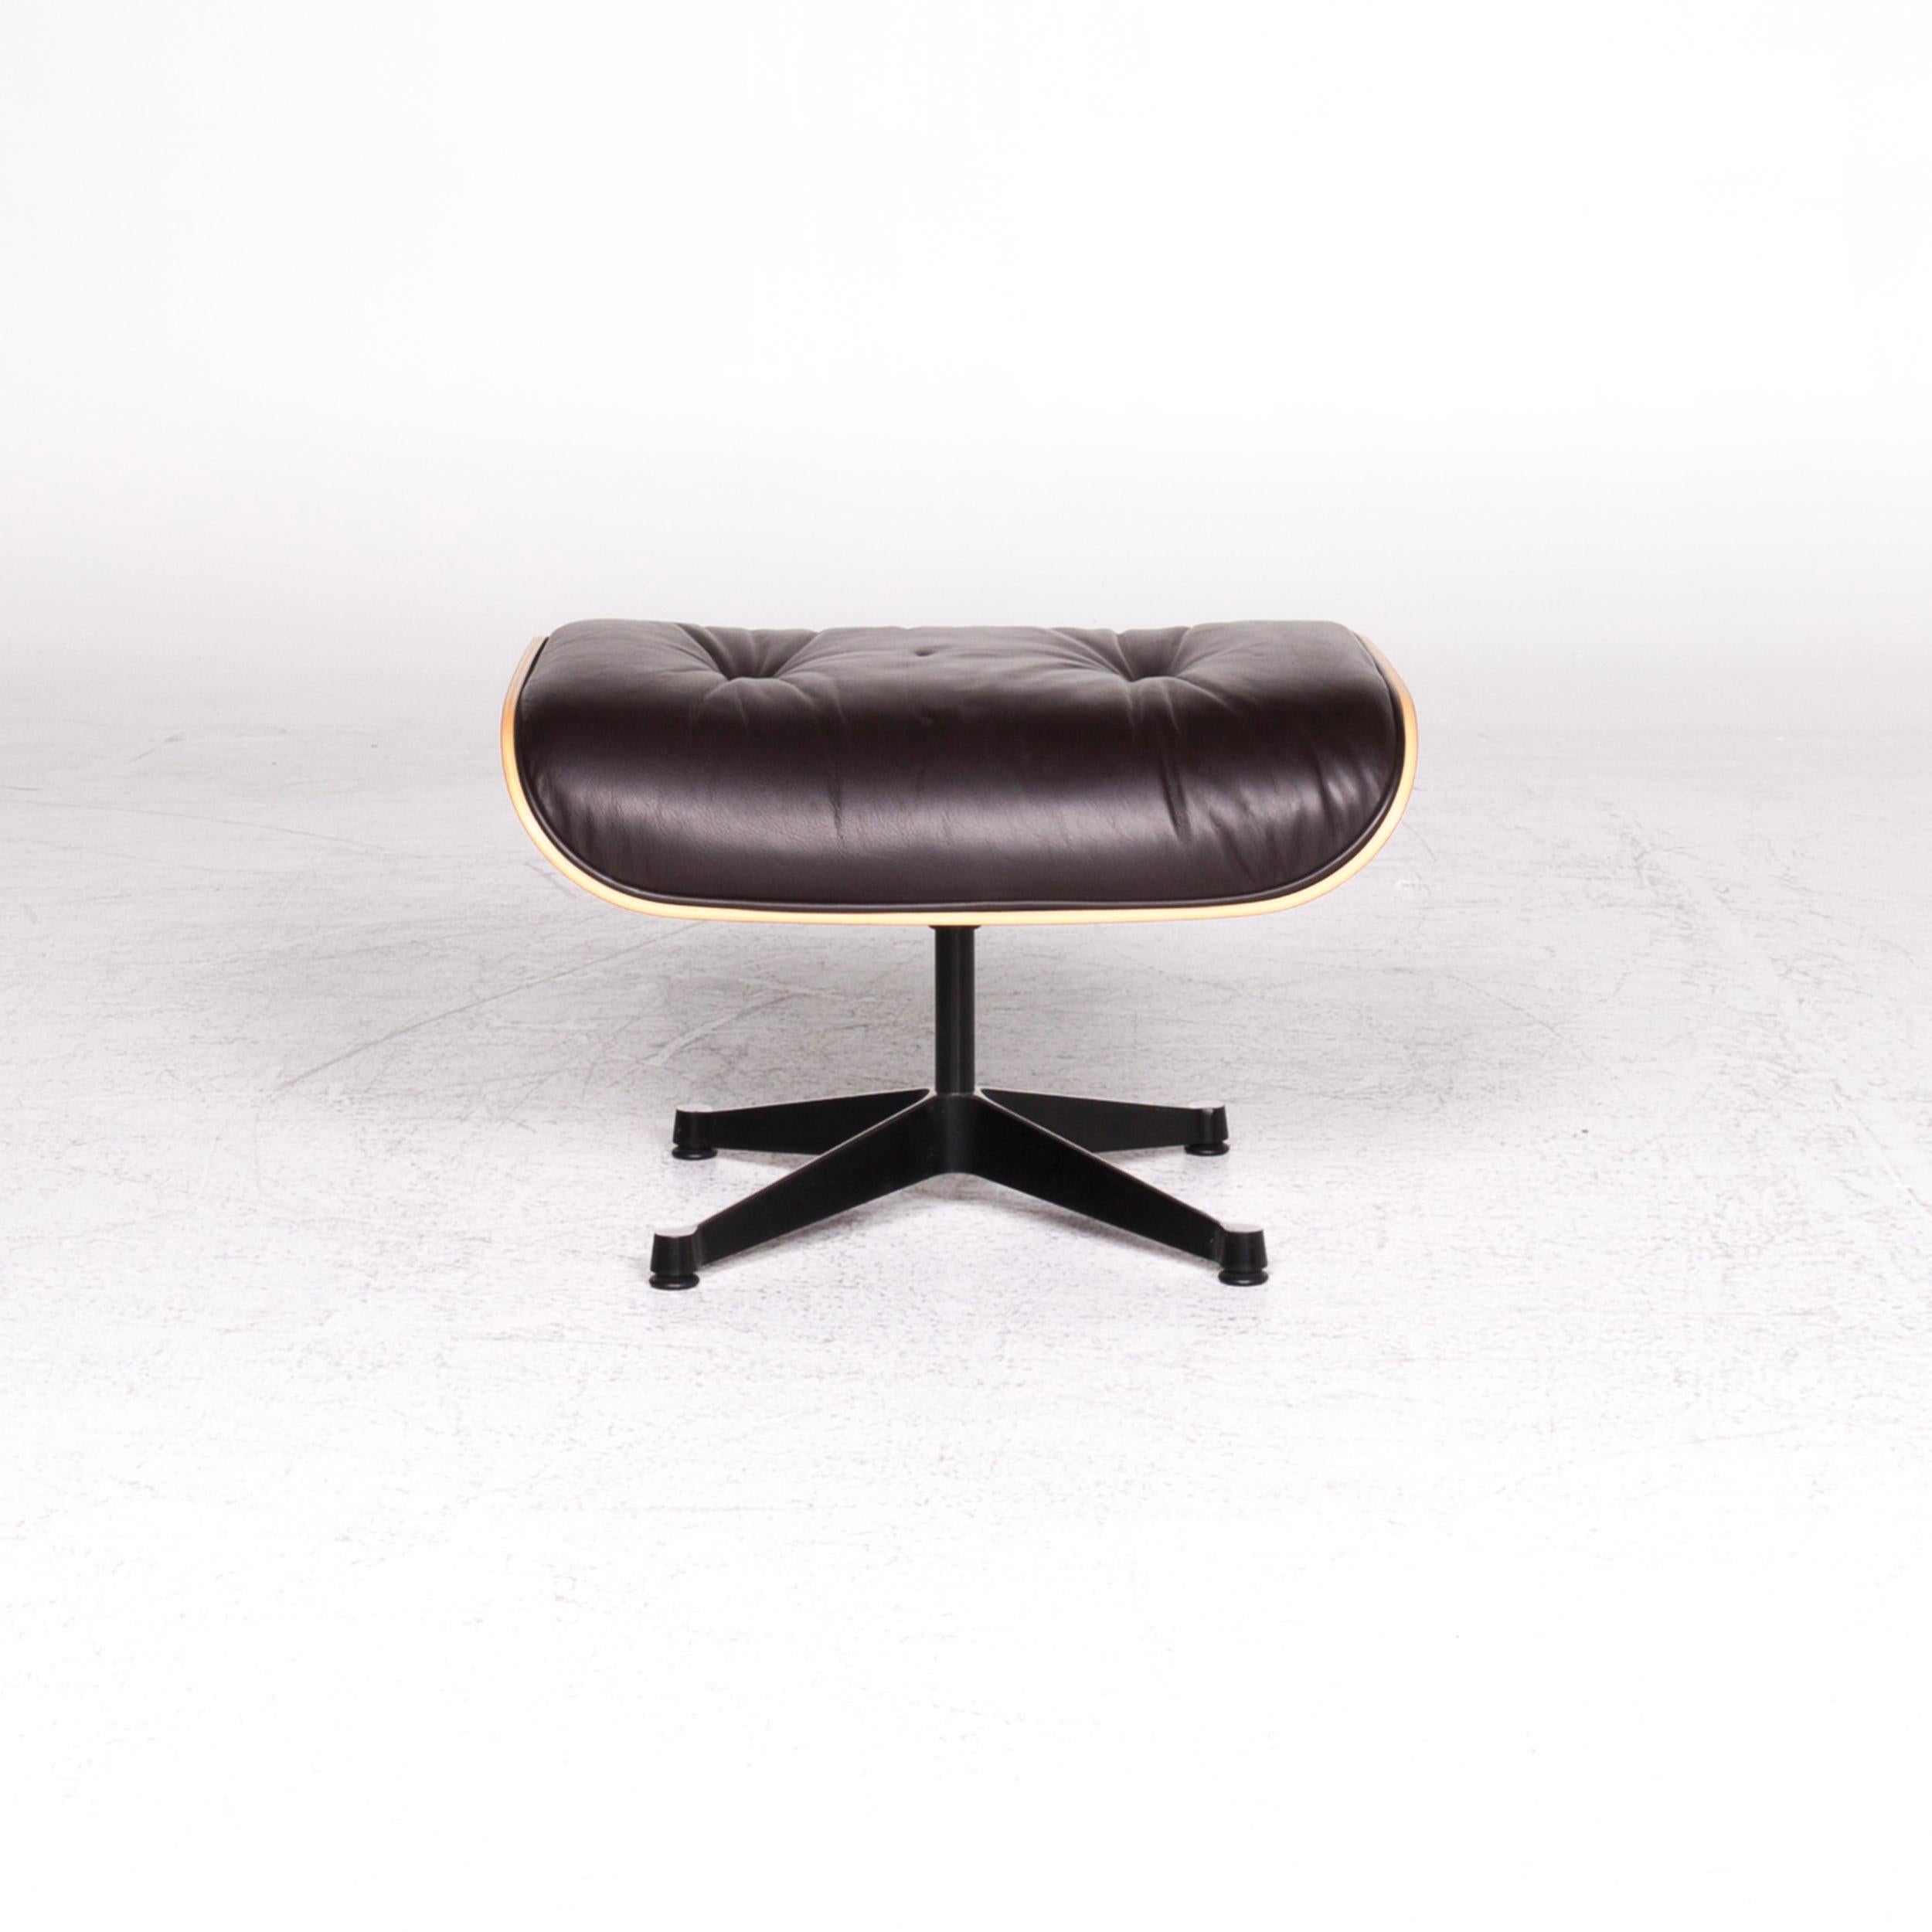 Vitra Eames Lounge Chair Leather Stool Brown Charles & Ray Eames Chair (Deutsch) im Angebot